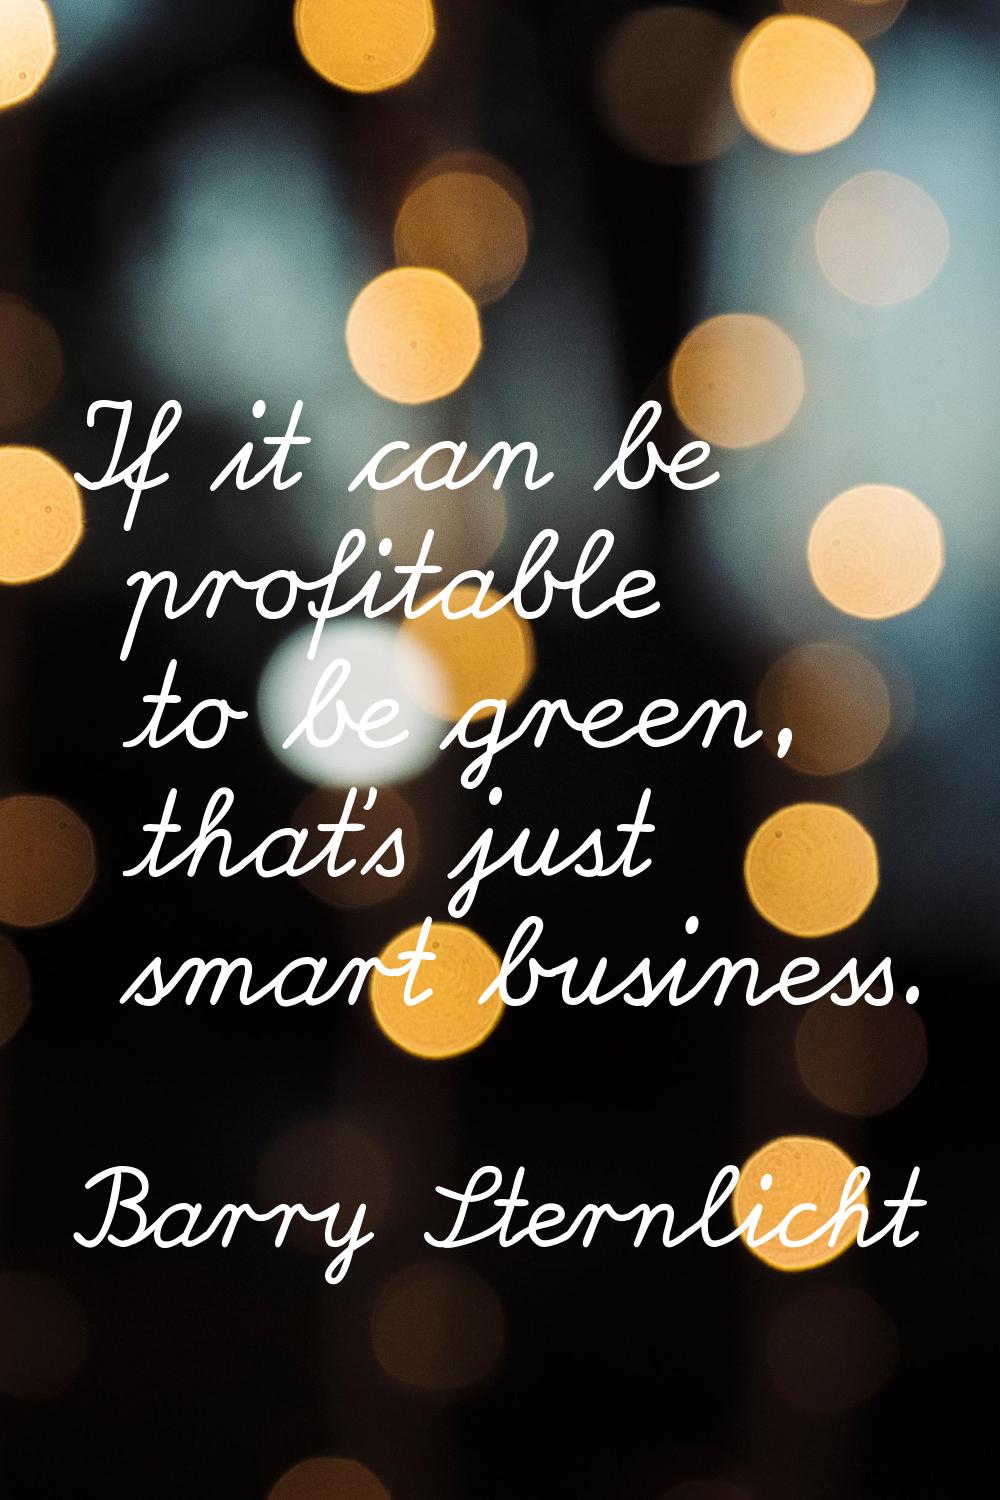 If it can be profitable to be green, that's just smart business.